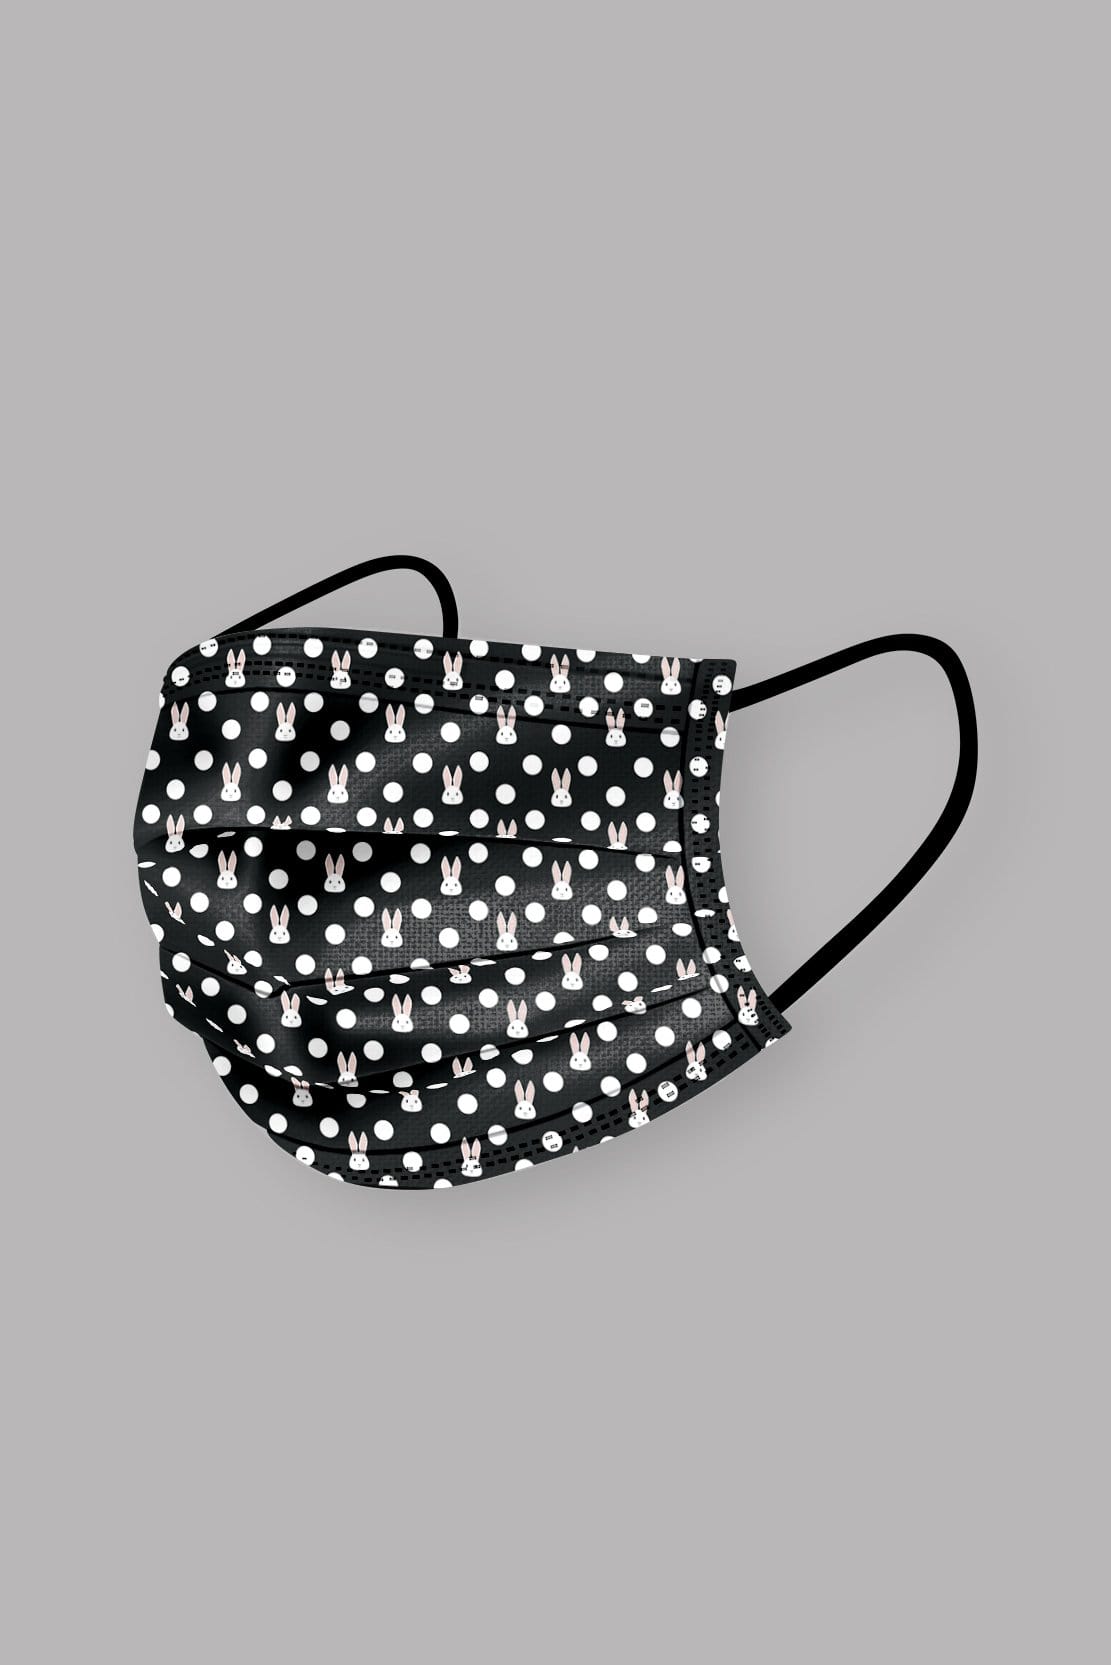 Stylish Polka Dot Bunny Printed Pleated face mask, with soft black ear loops and high quality fabric. 